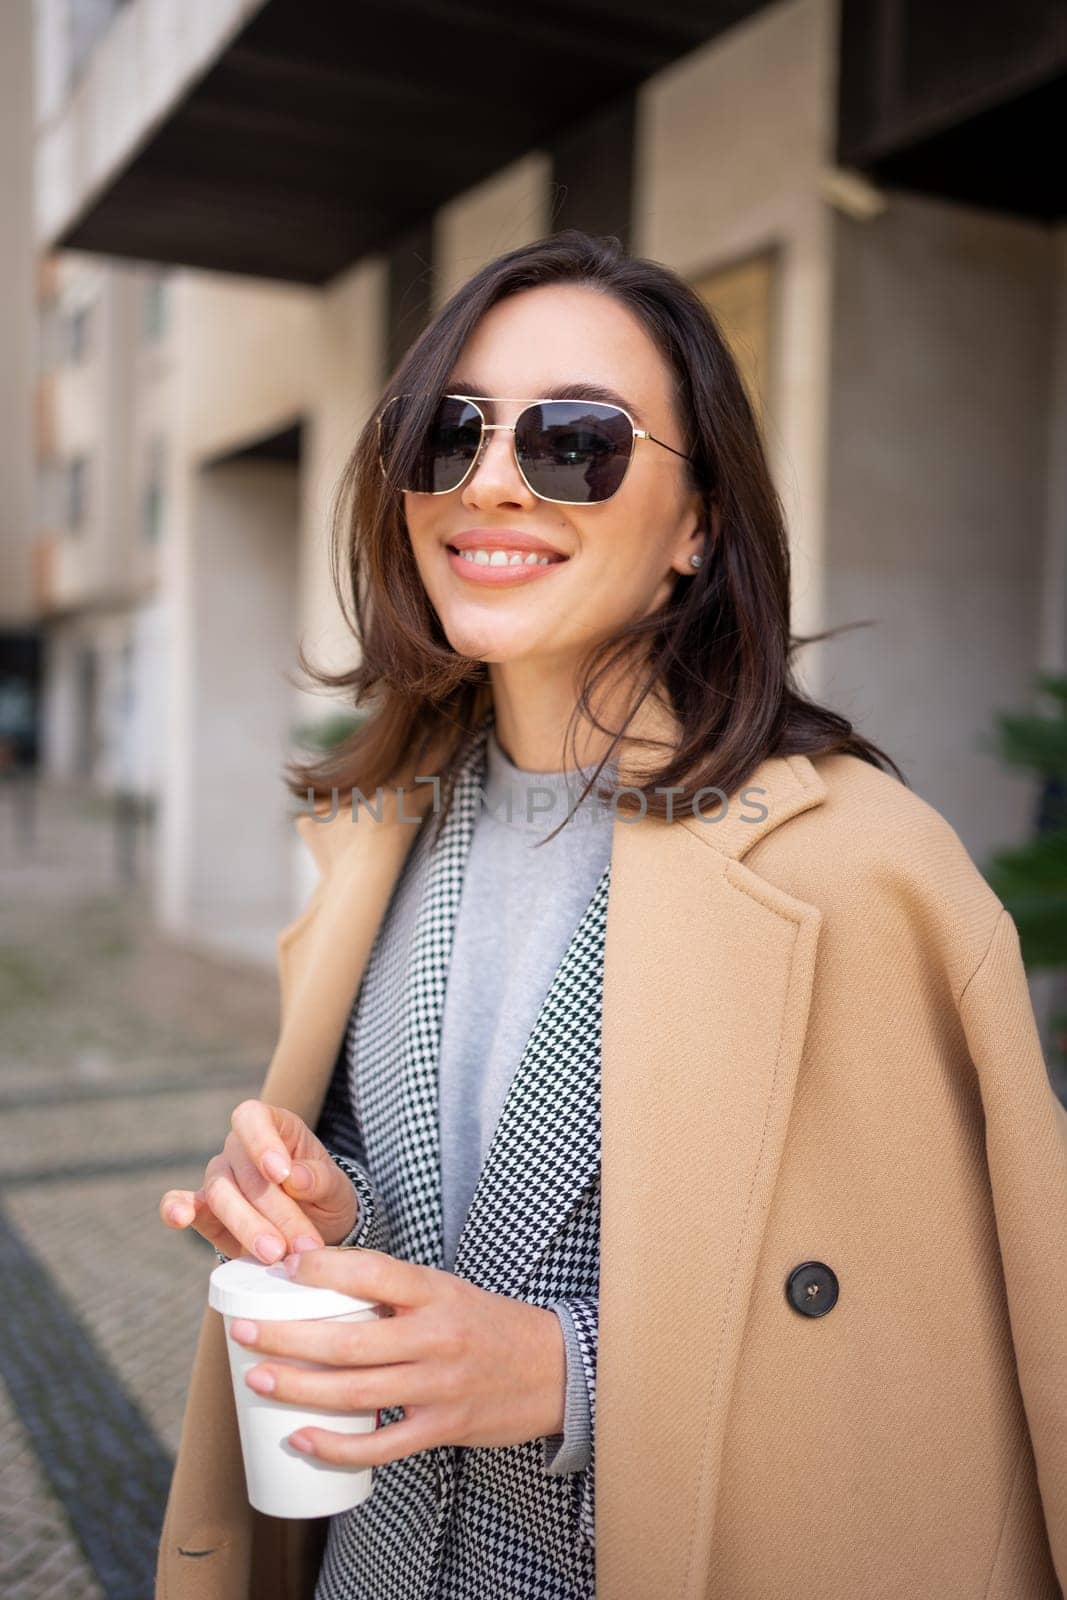 Streetstyle, street fashion concept: woman wearing trendy outfit walking in city. Cream trench coat, sunglasses. Looking camera, vertical photo